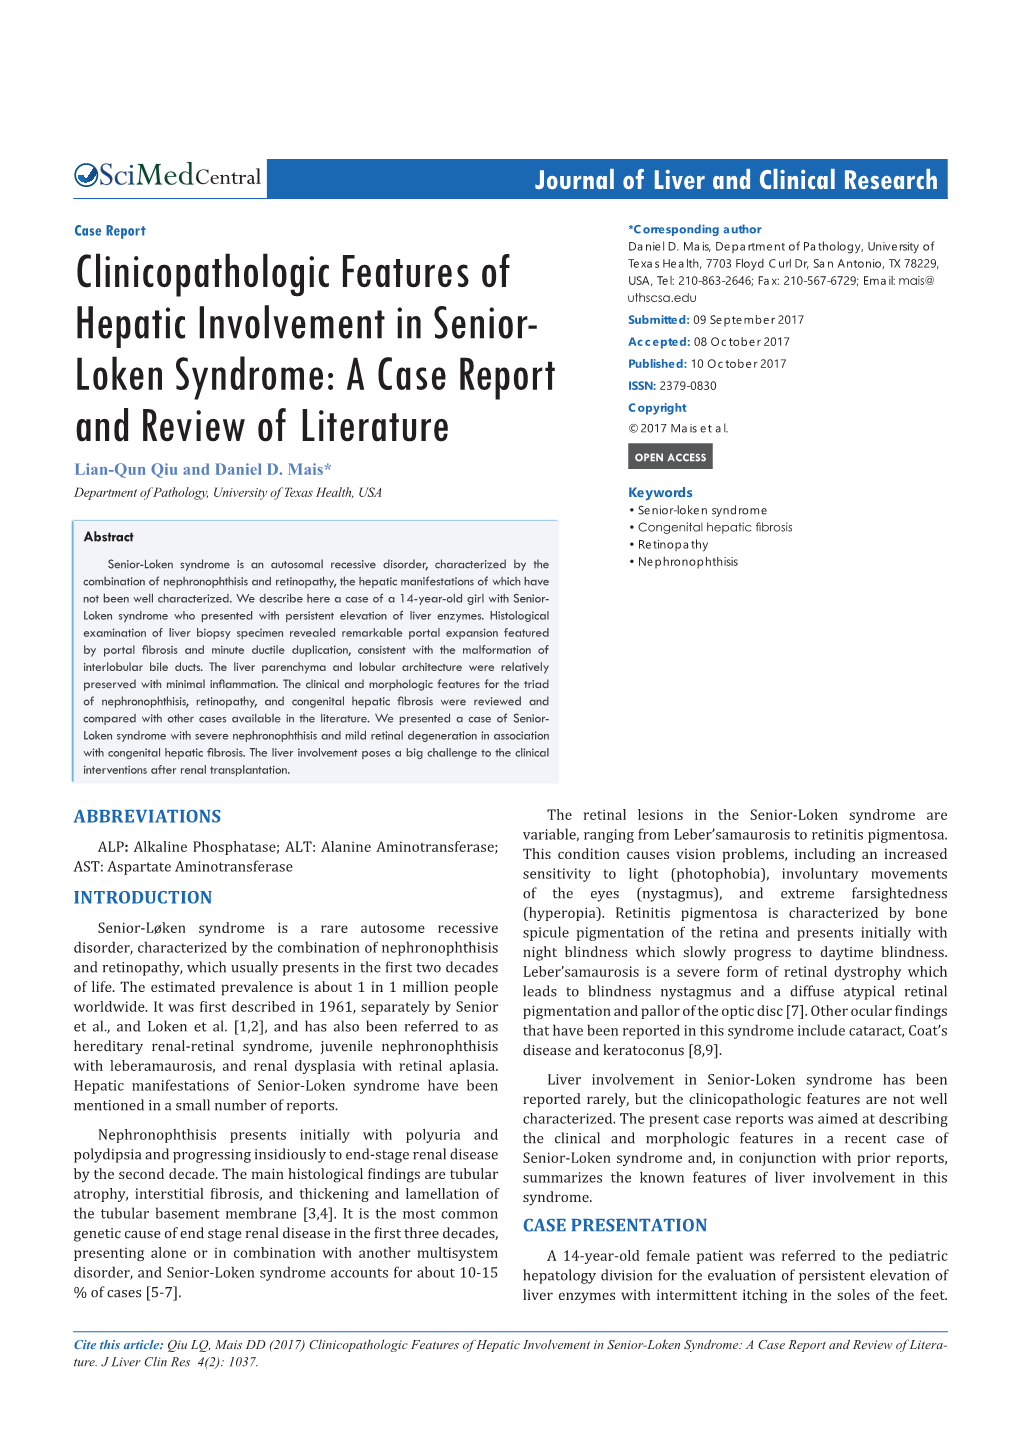 Clinicopathologic Features of Hepatic Involvement in Senior-Loken Syndrome: a Case Report and Review of Litera- Ture